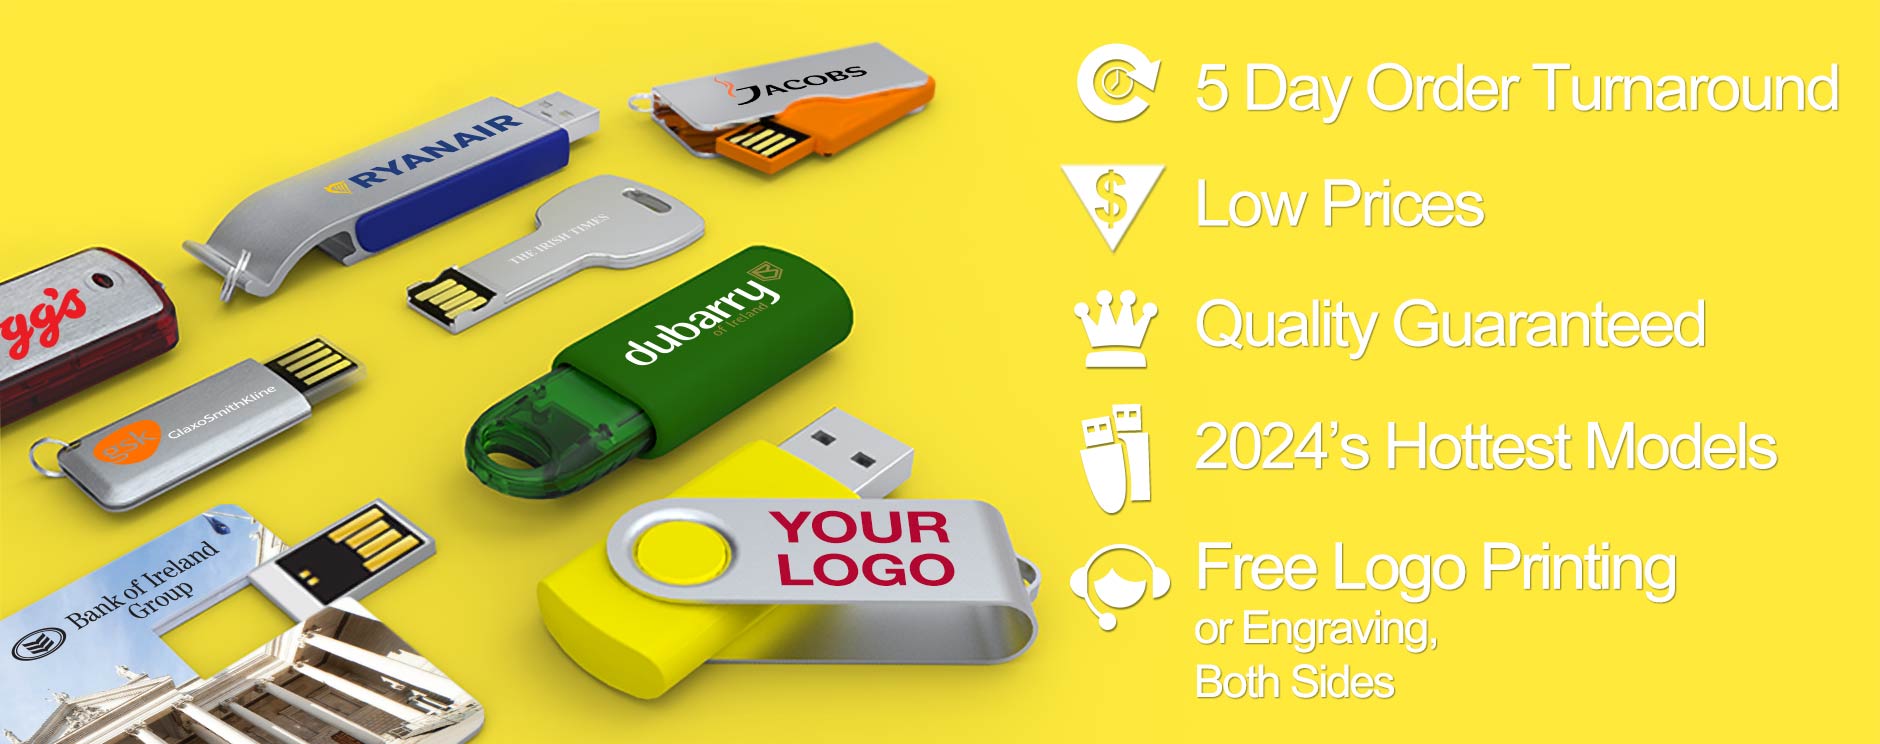 Branded USB Sticks and more Printed with Your Logo